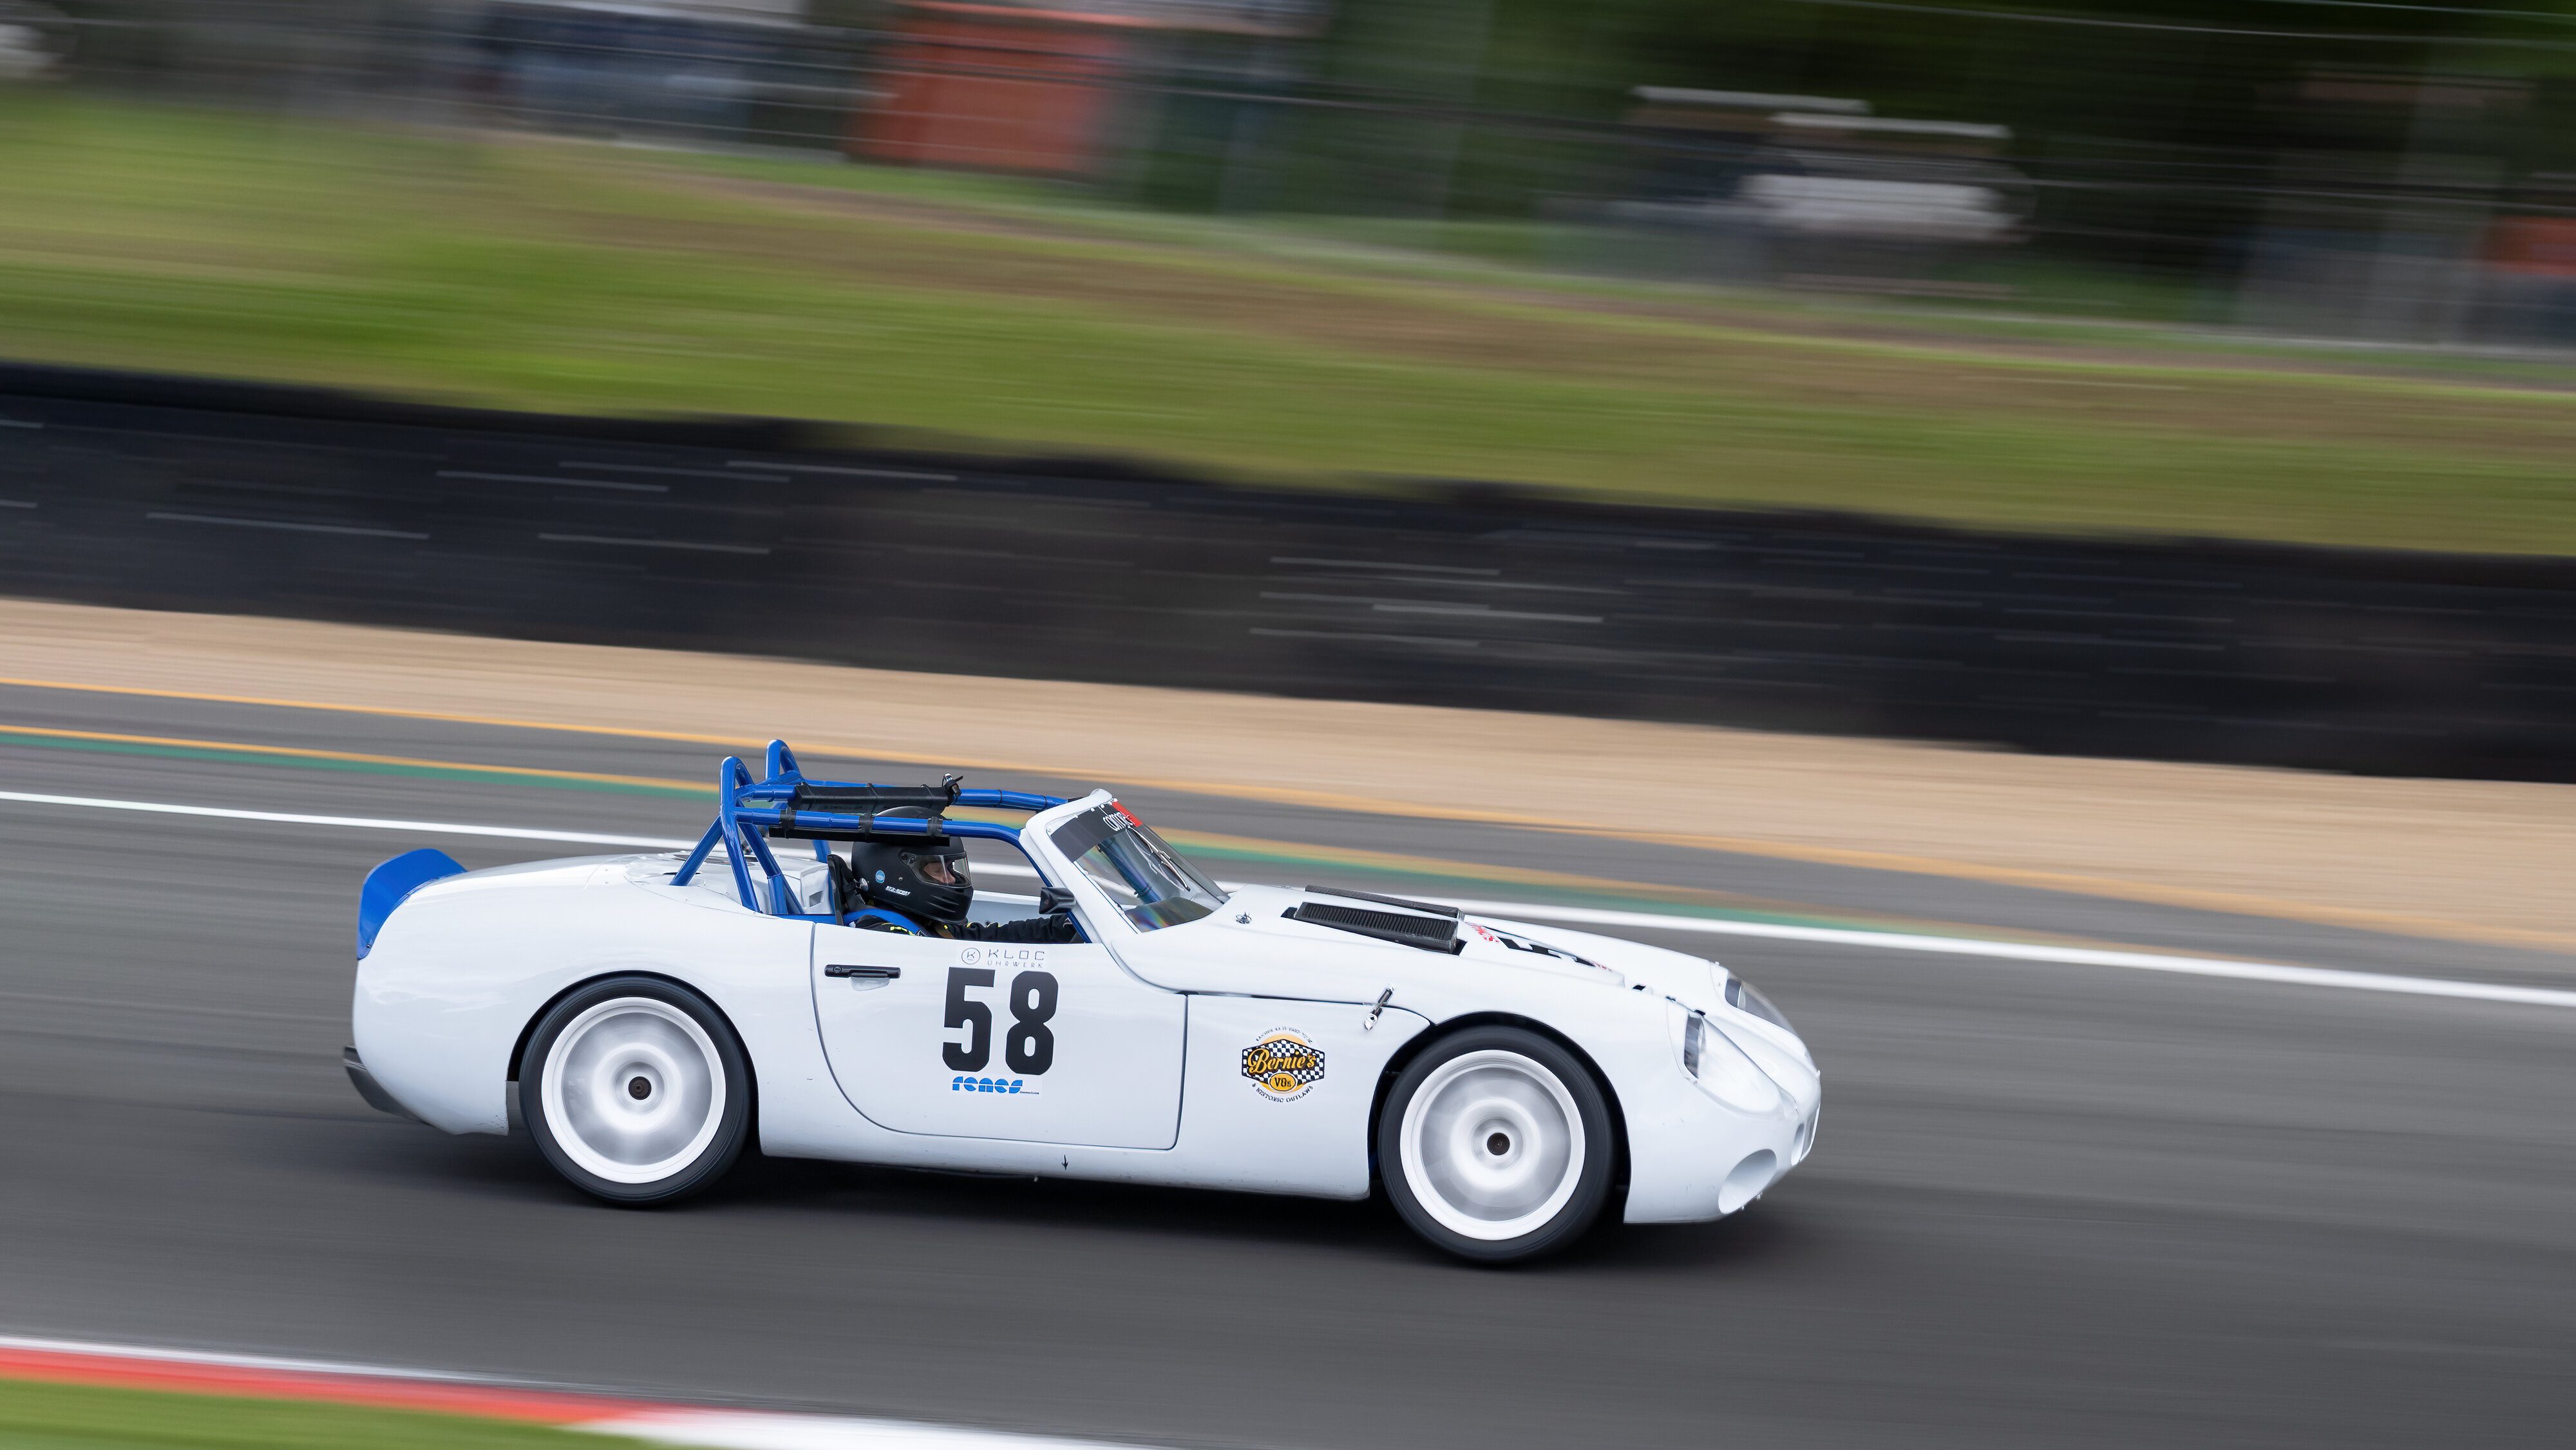 Clive LETHERBY TVR Tuscan.jpg